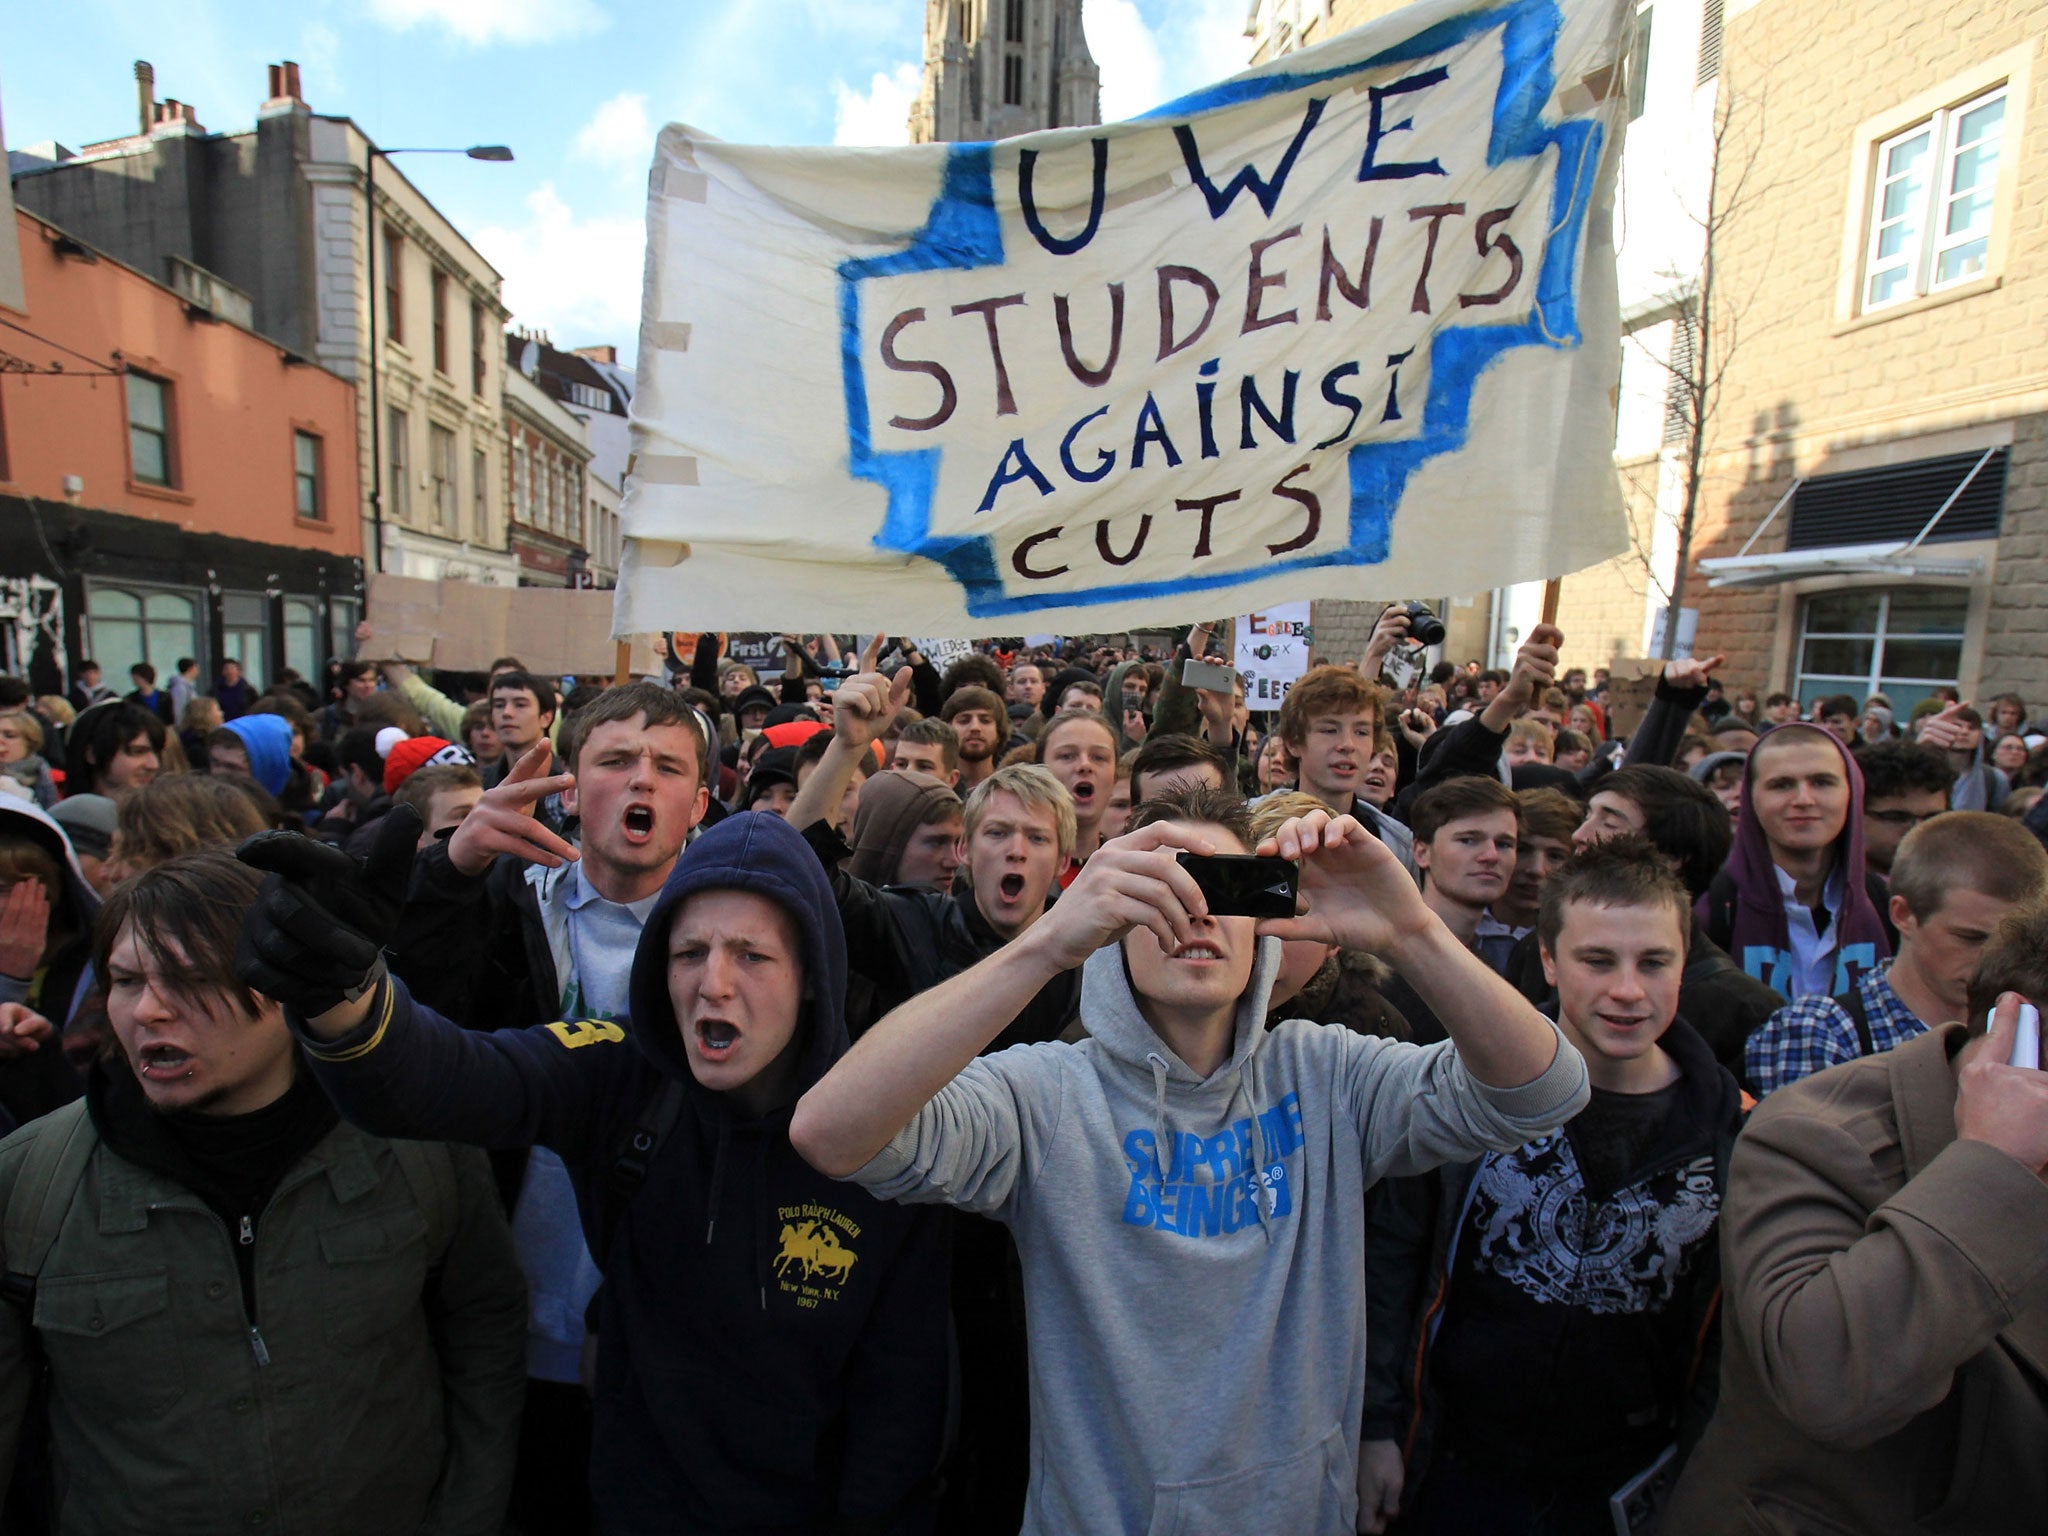 Students walk out of lectures and classes to join a protest against the rise in tuition fees on November 24, 2010 in Bristol, United Kingdom.